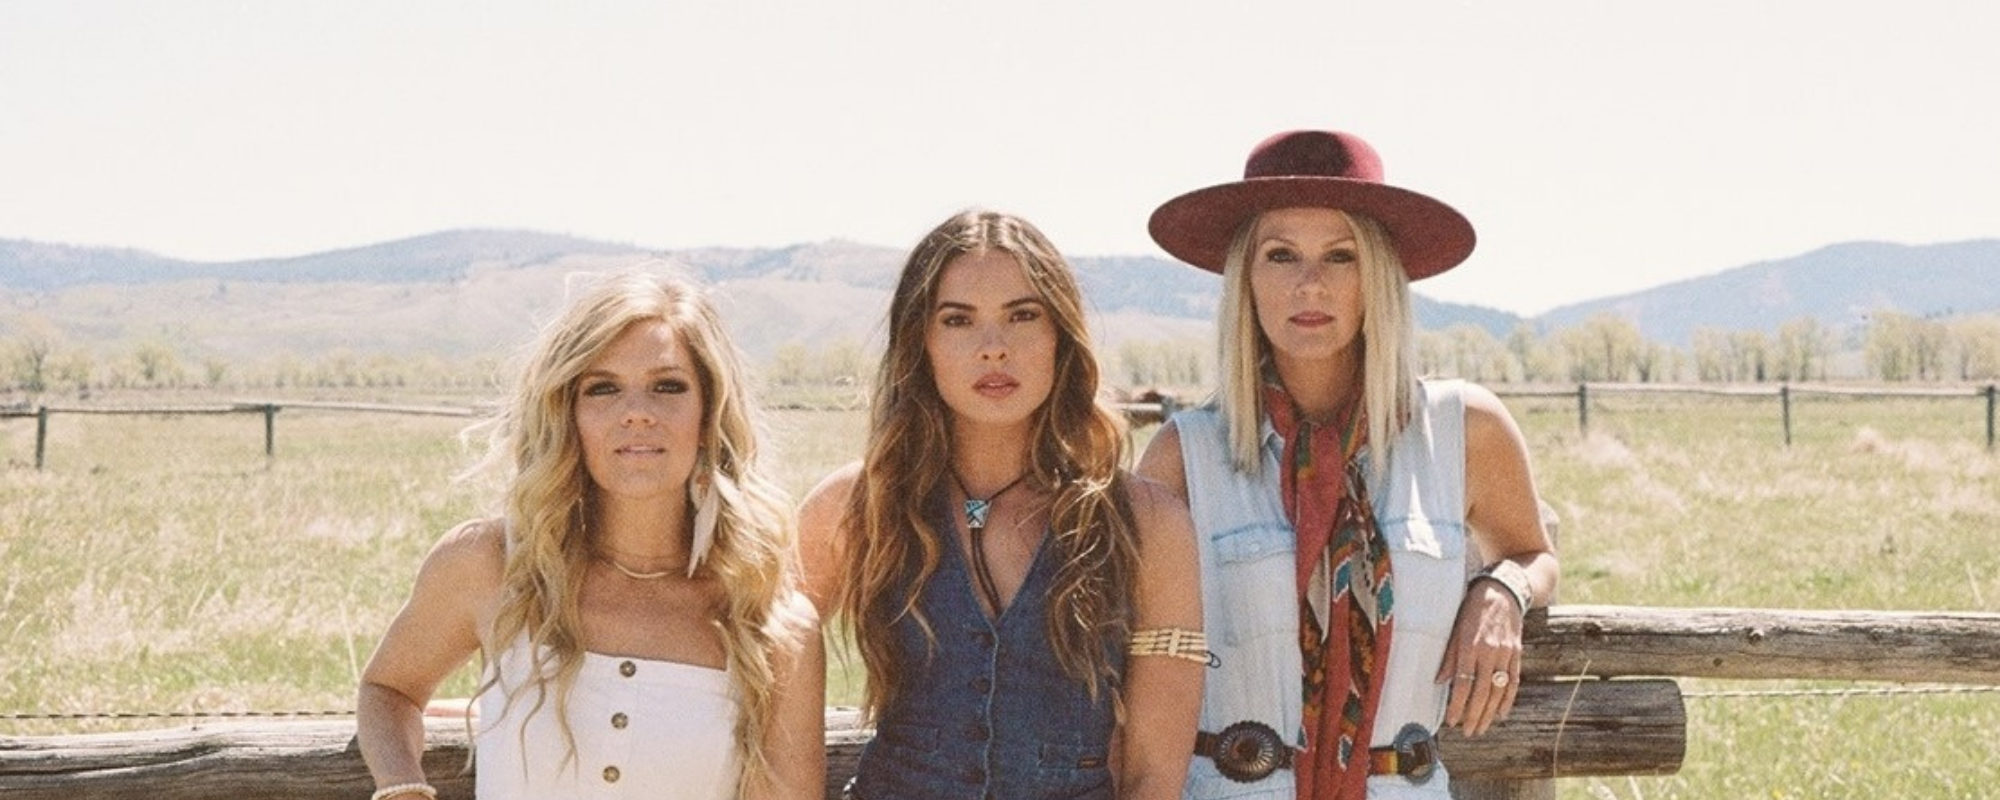 Country Trio Runaway June Introduces New Member Natalie Stovall On ‘Backstory’ EP Before Hitting the Road with Luke Bryan